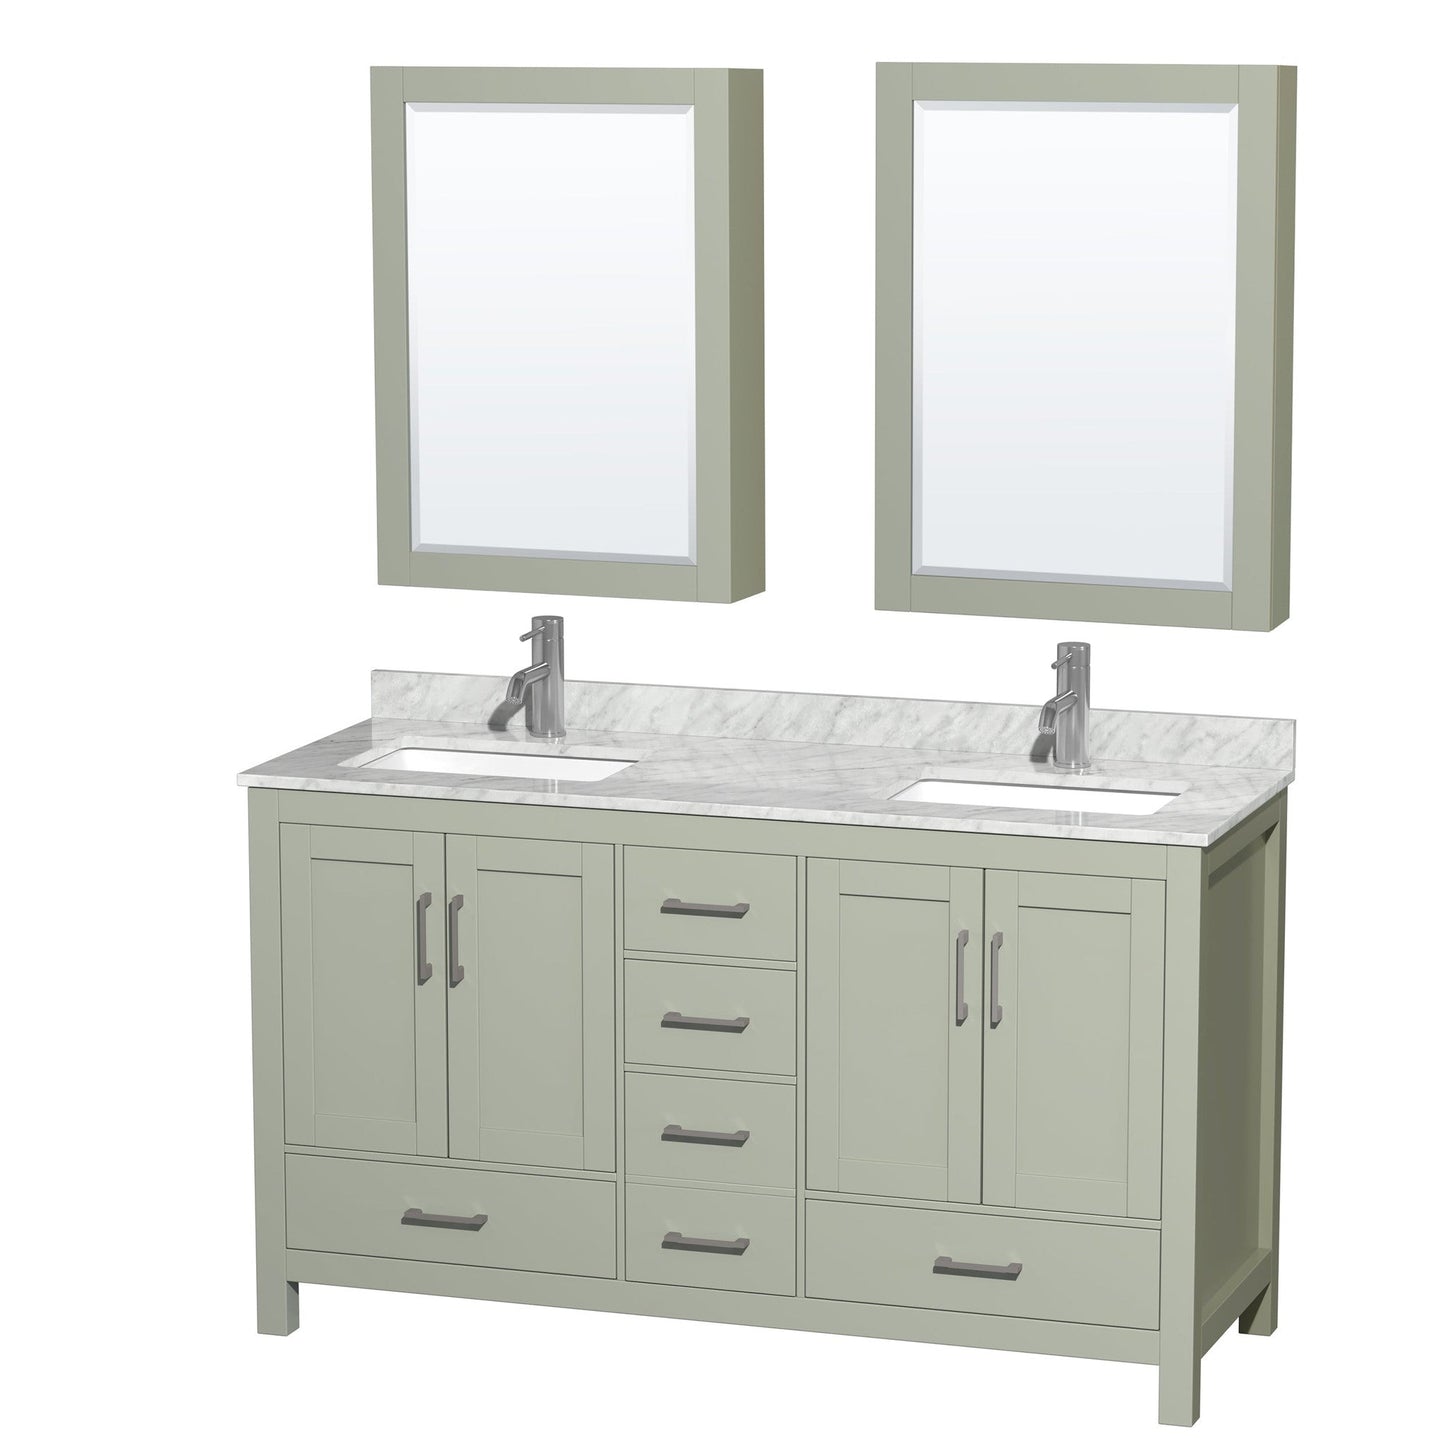 Sheffield 60" Double Bathroom Vanity in Light Green, White Carrara Marble Countertop, Undermount Square Sinks, Brushed Nickel Trim, Medicine Cabinets